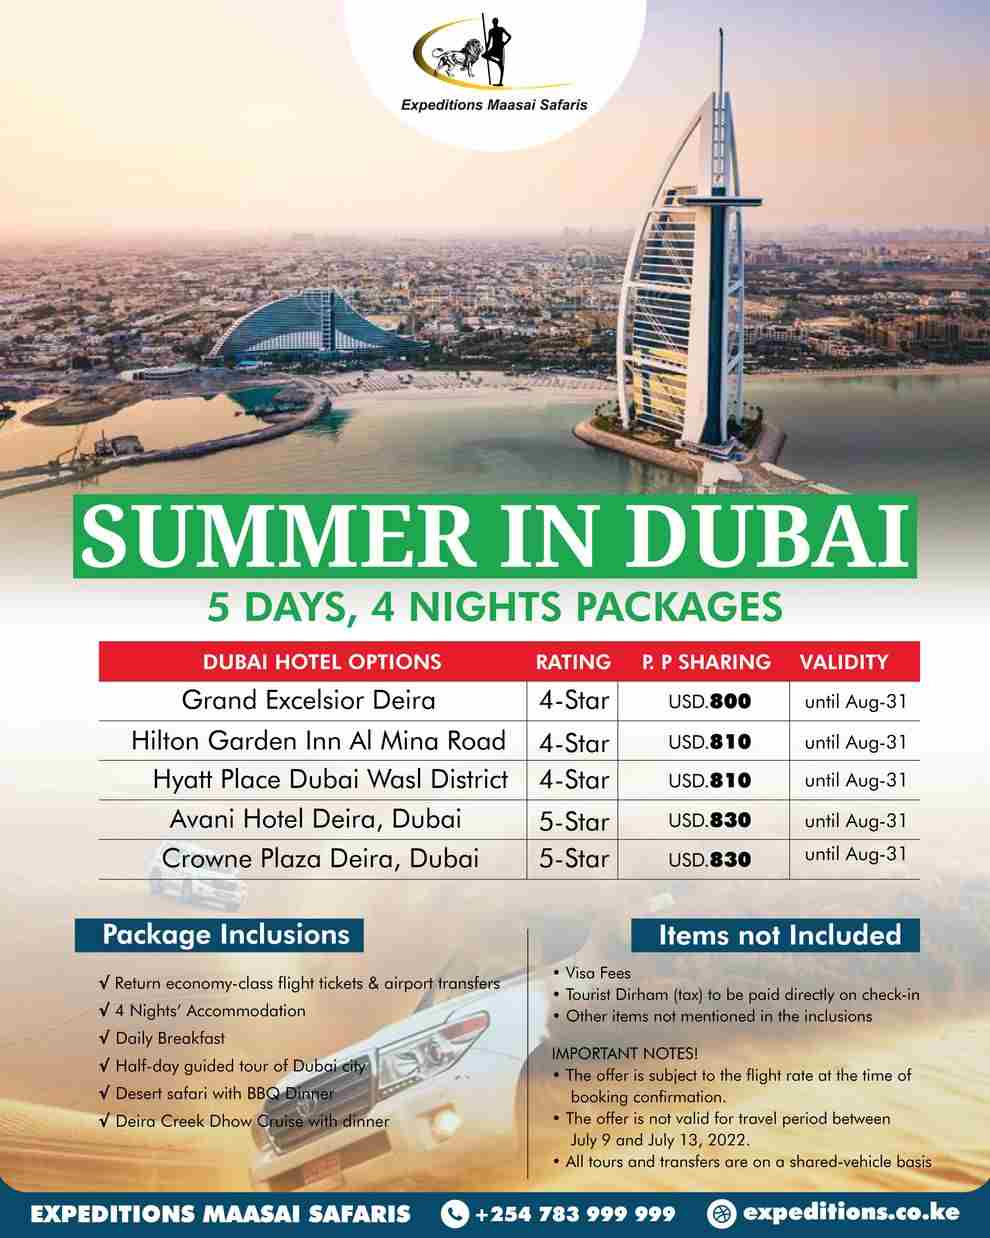 Enjoy the best holidays in Dubai with Expeditions Maasai Safaris affordable 5 Days, 4 Nights Dubai Holiday packages